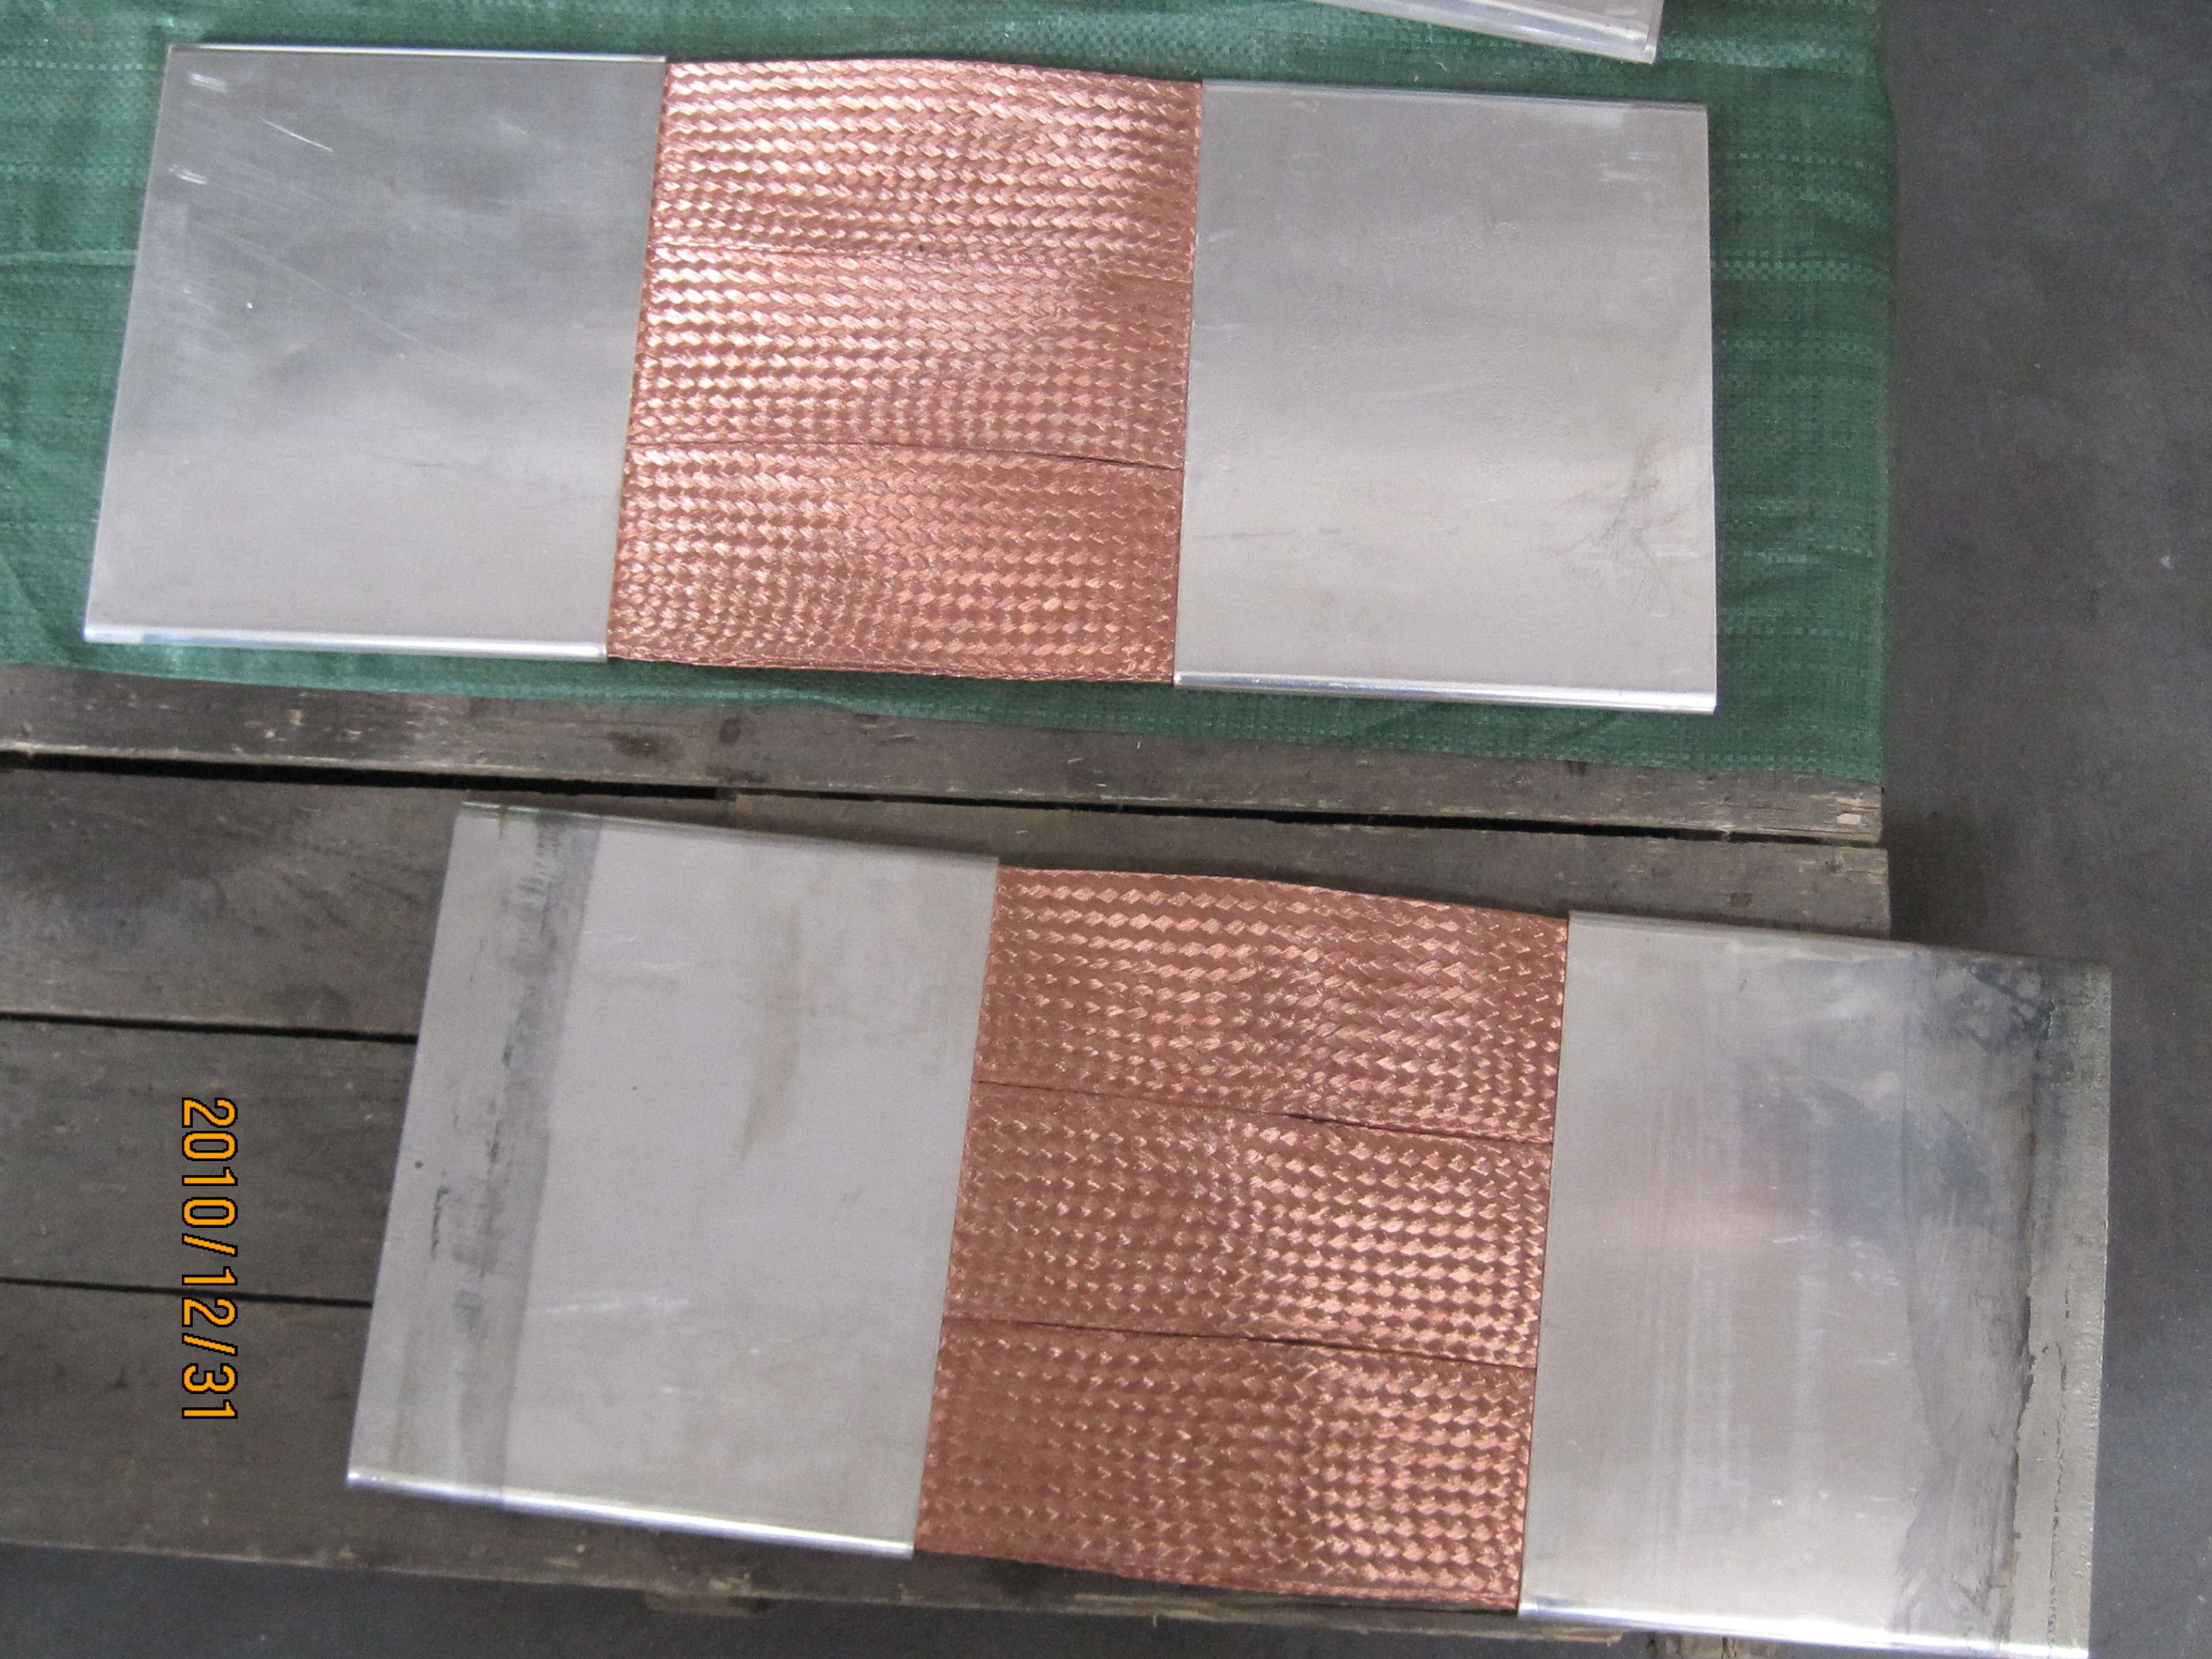  Welded Braided Copper Wire Roofing Products , 0.05 Mm Thickness Manufactures